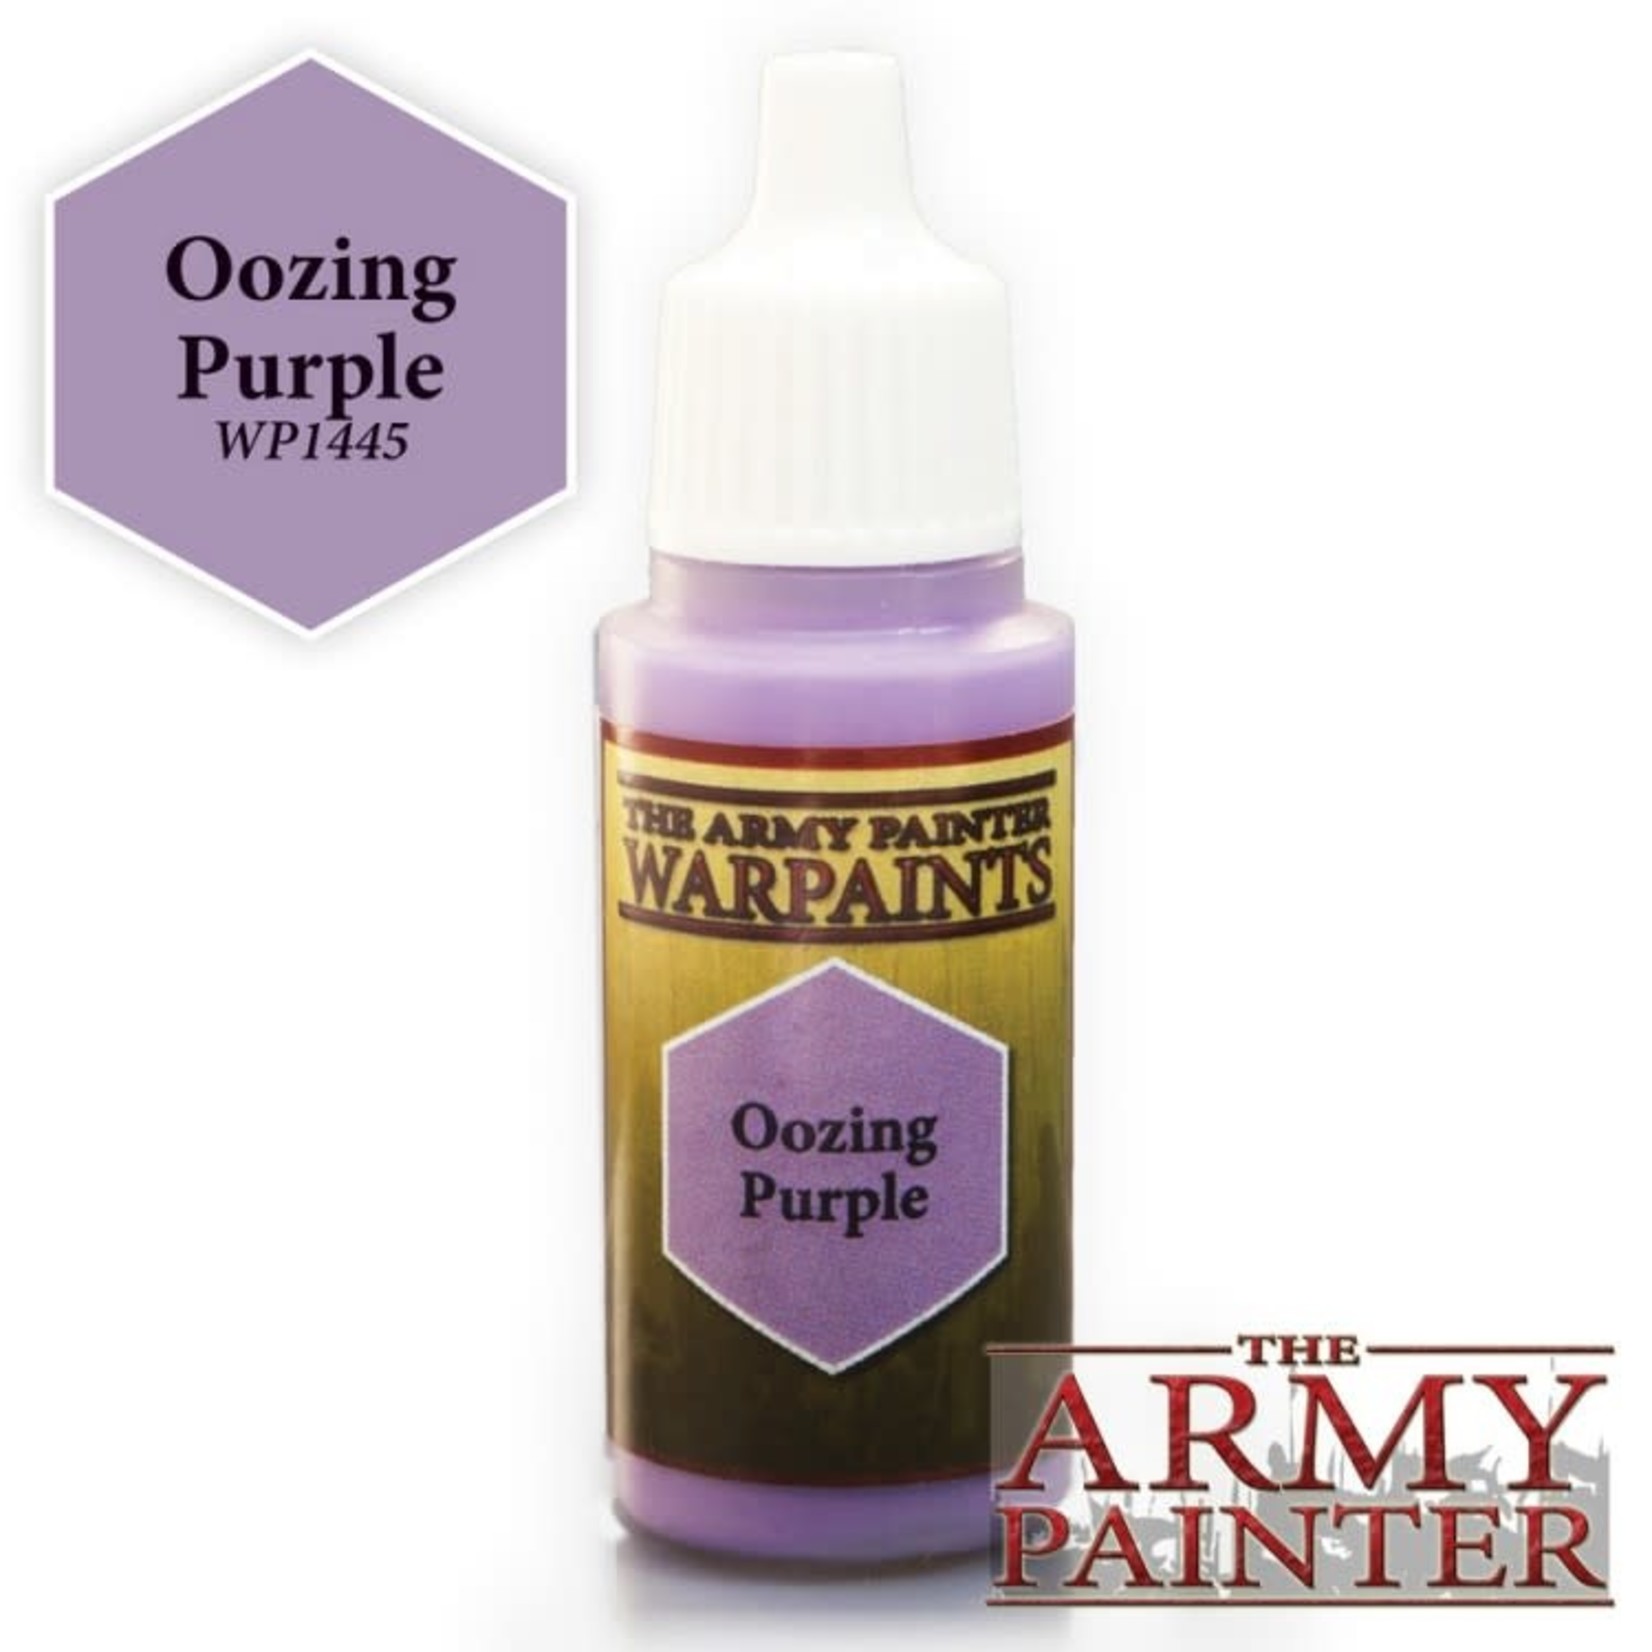 Army Painter Army Painter Warpaints Oozing Purple